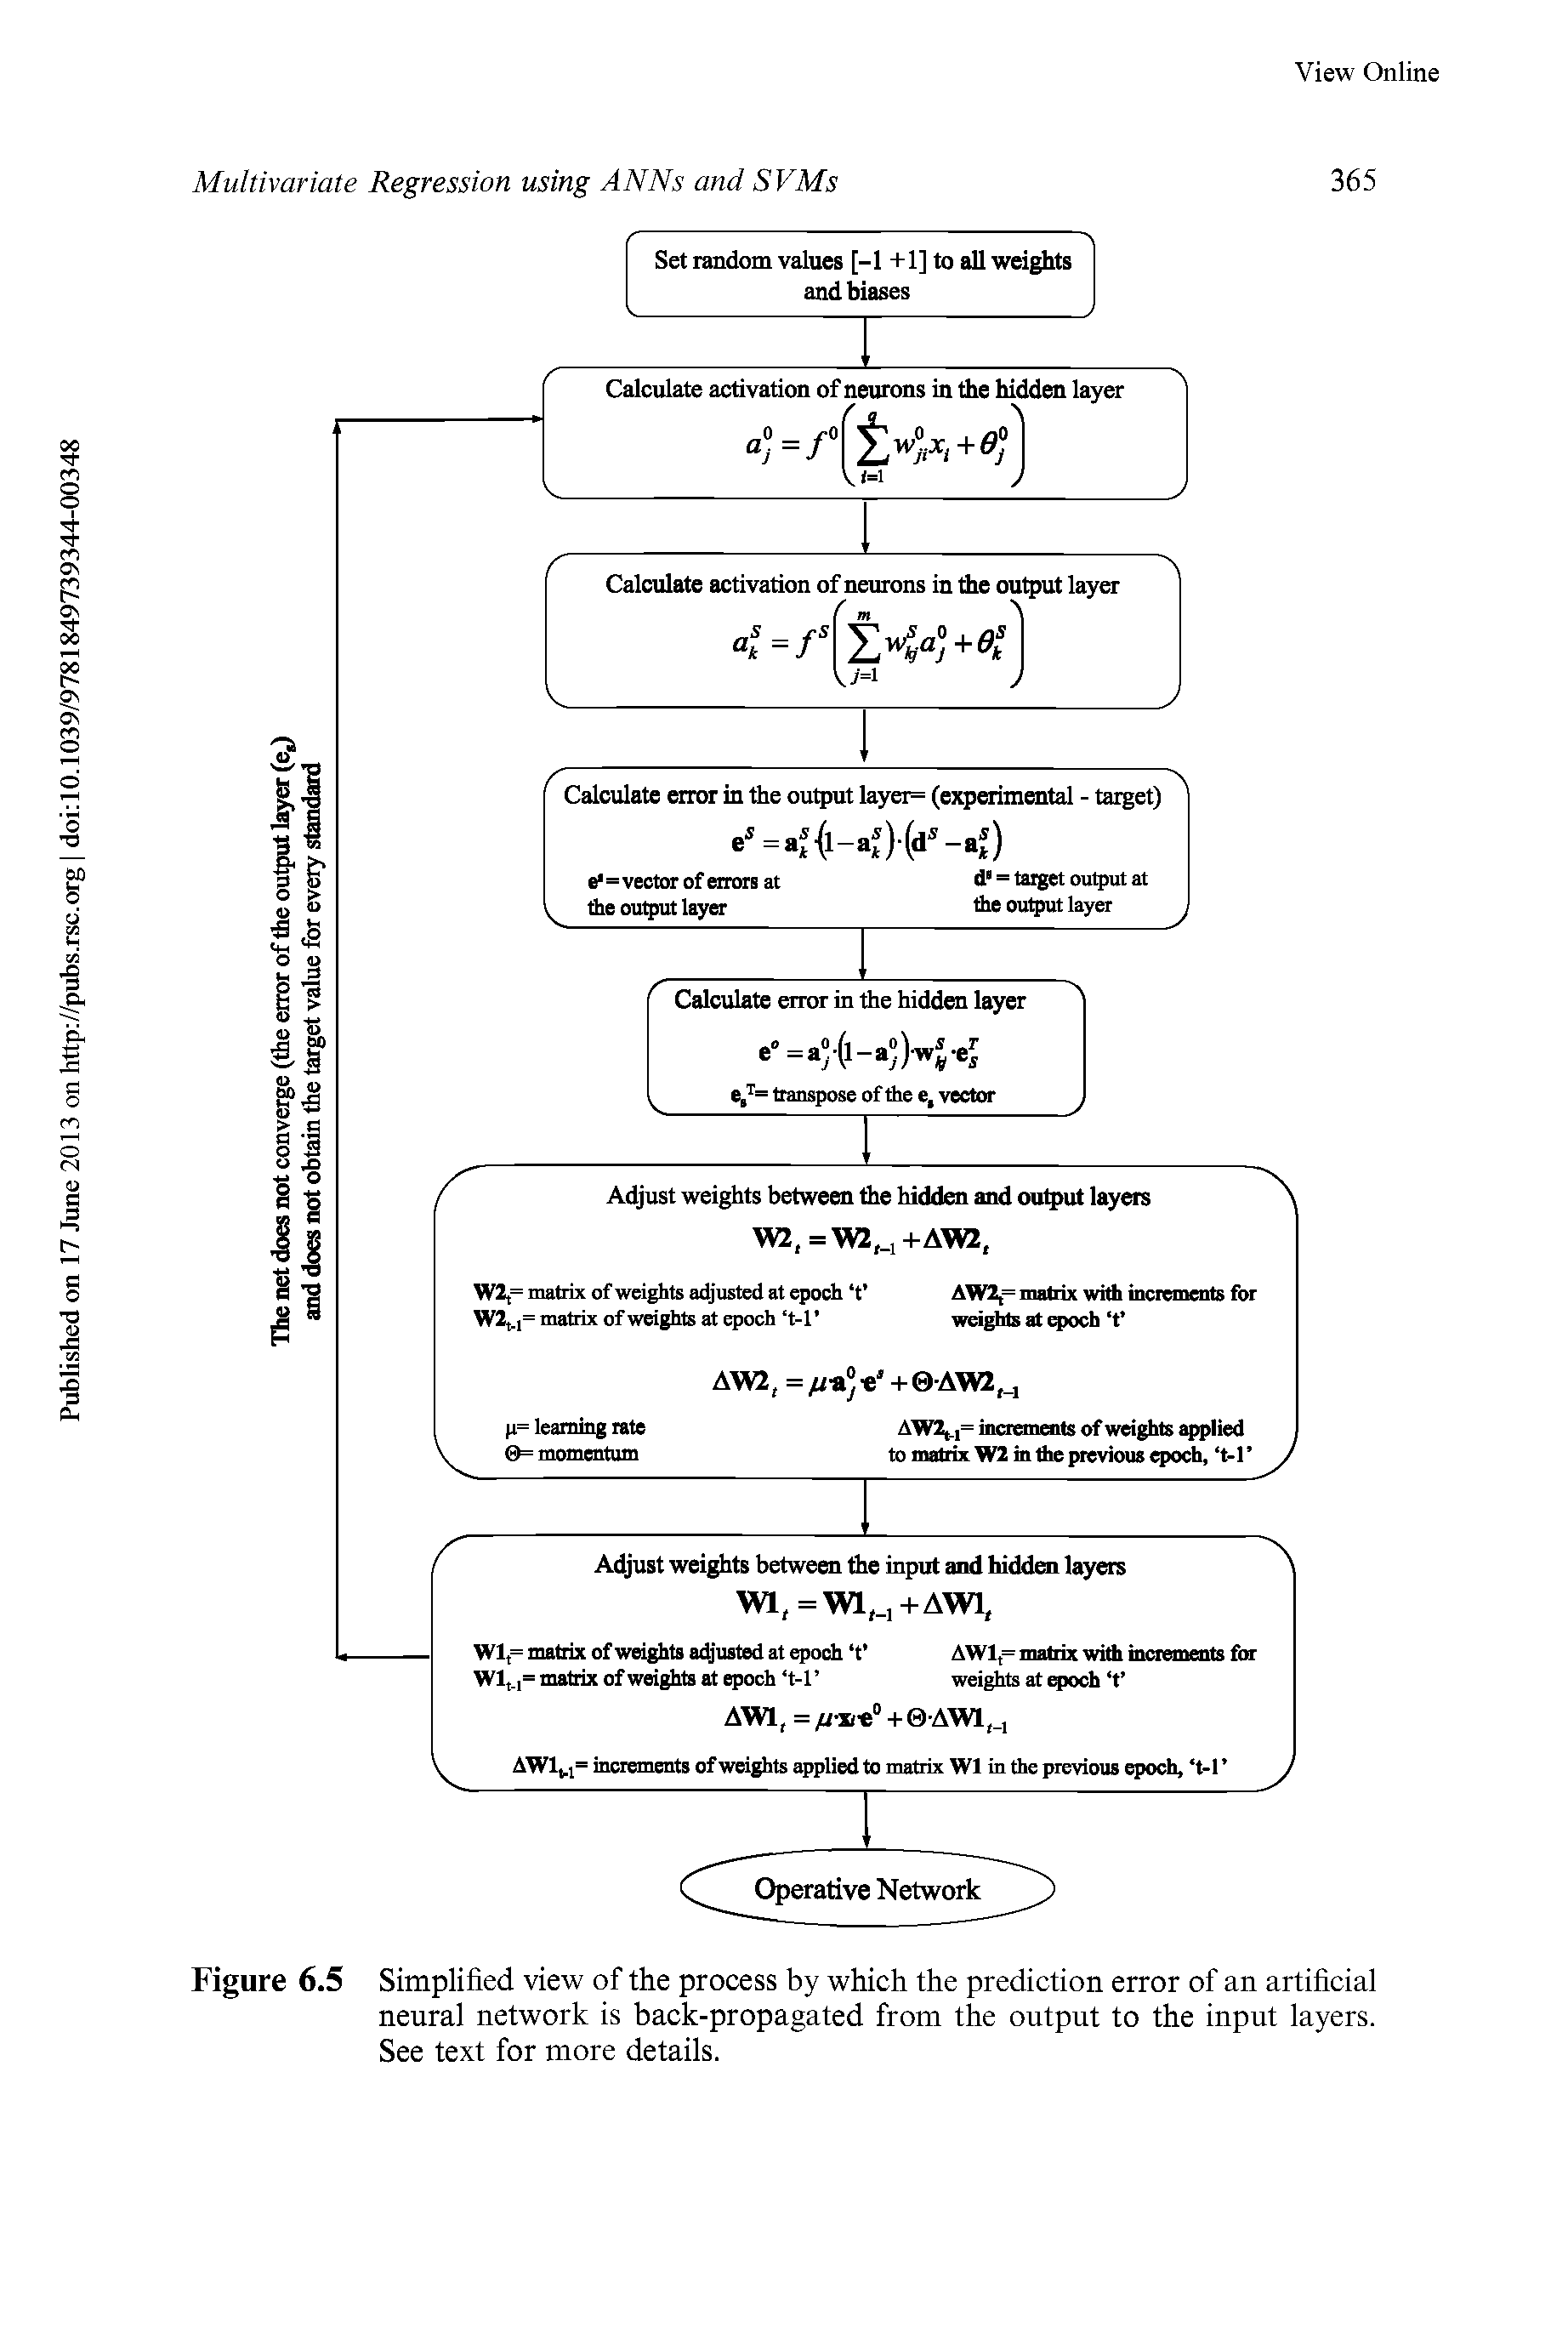 Figure 6.5 Simplified view of the process by which the prediction error of an artificial neural network is back-propagated from the output to the input layers. See text for more details.